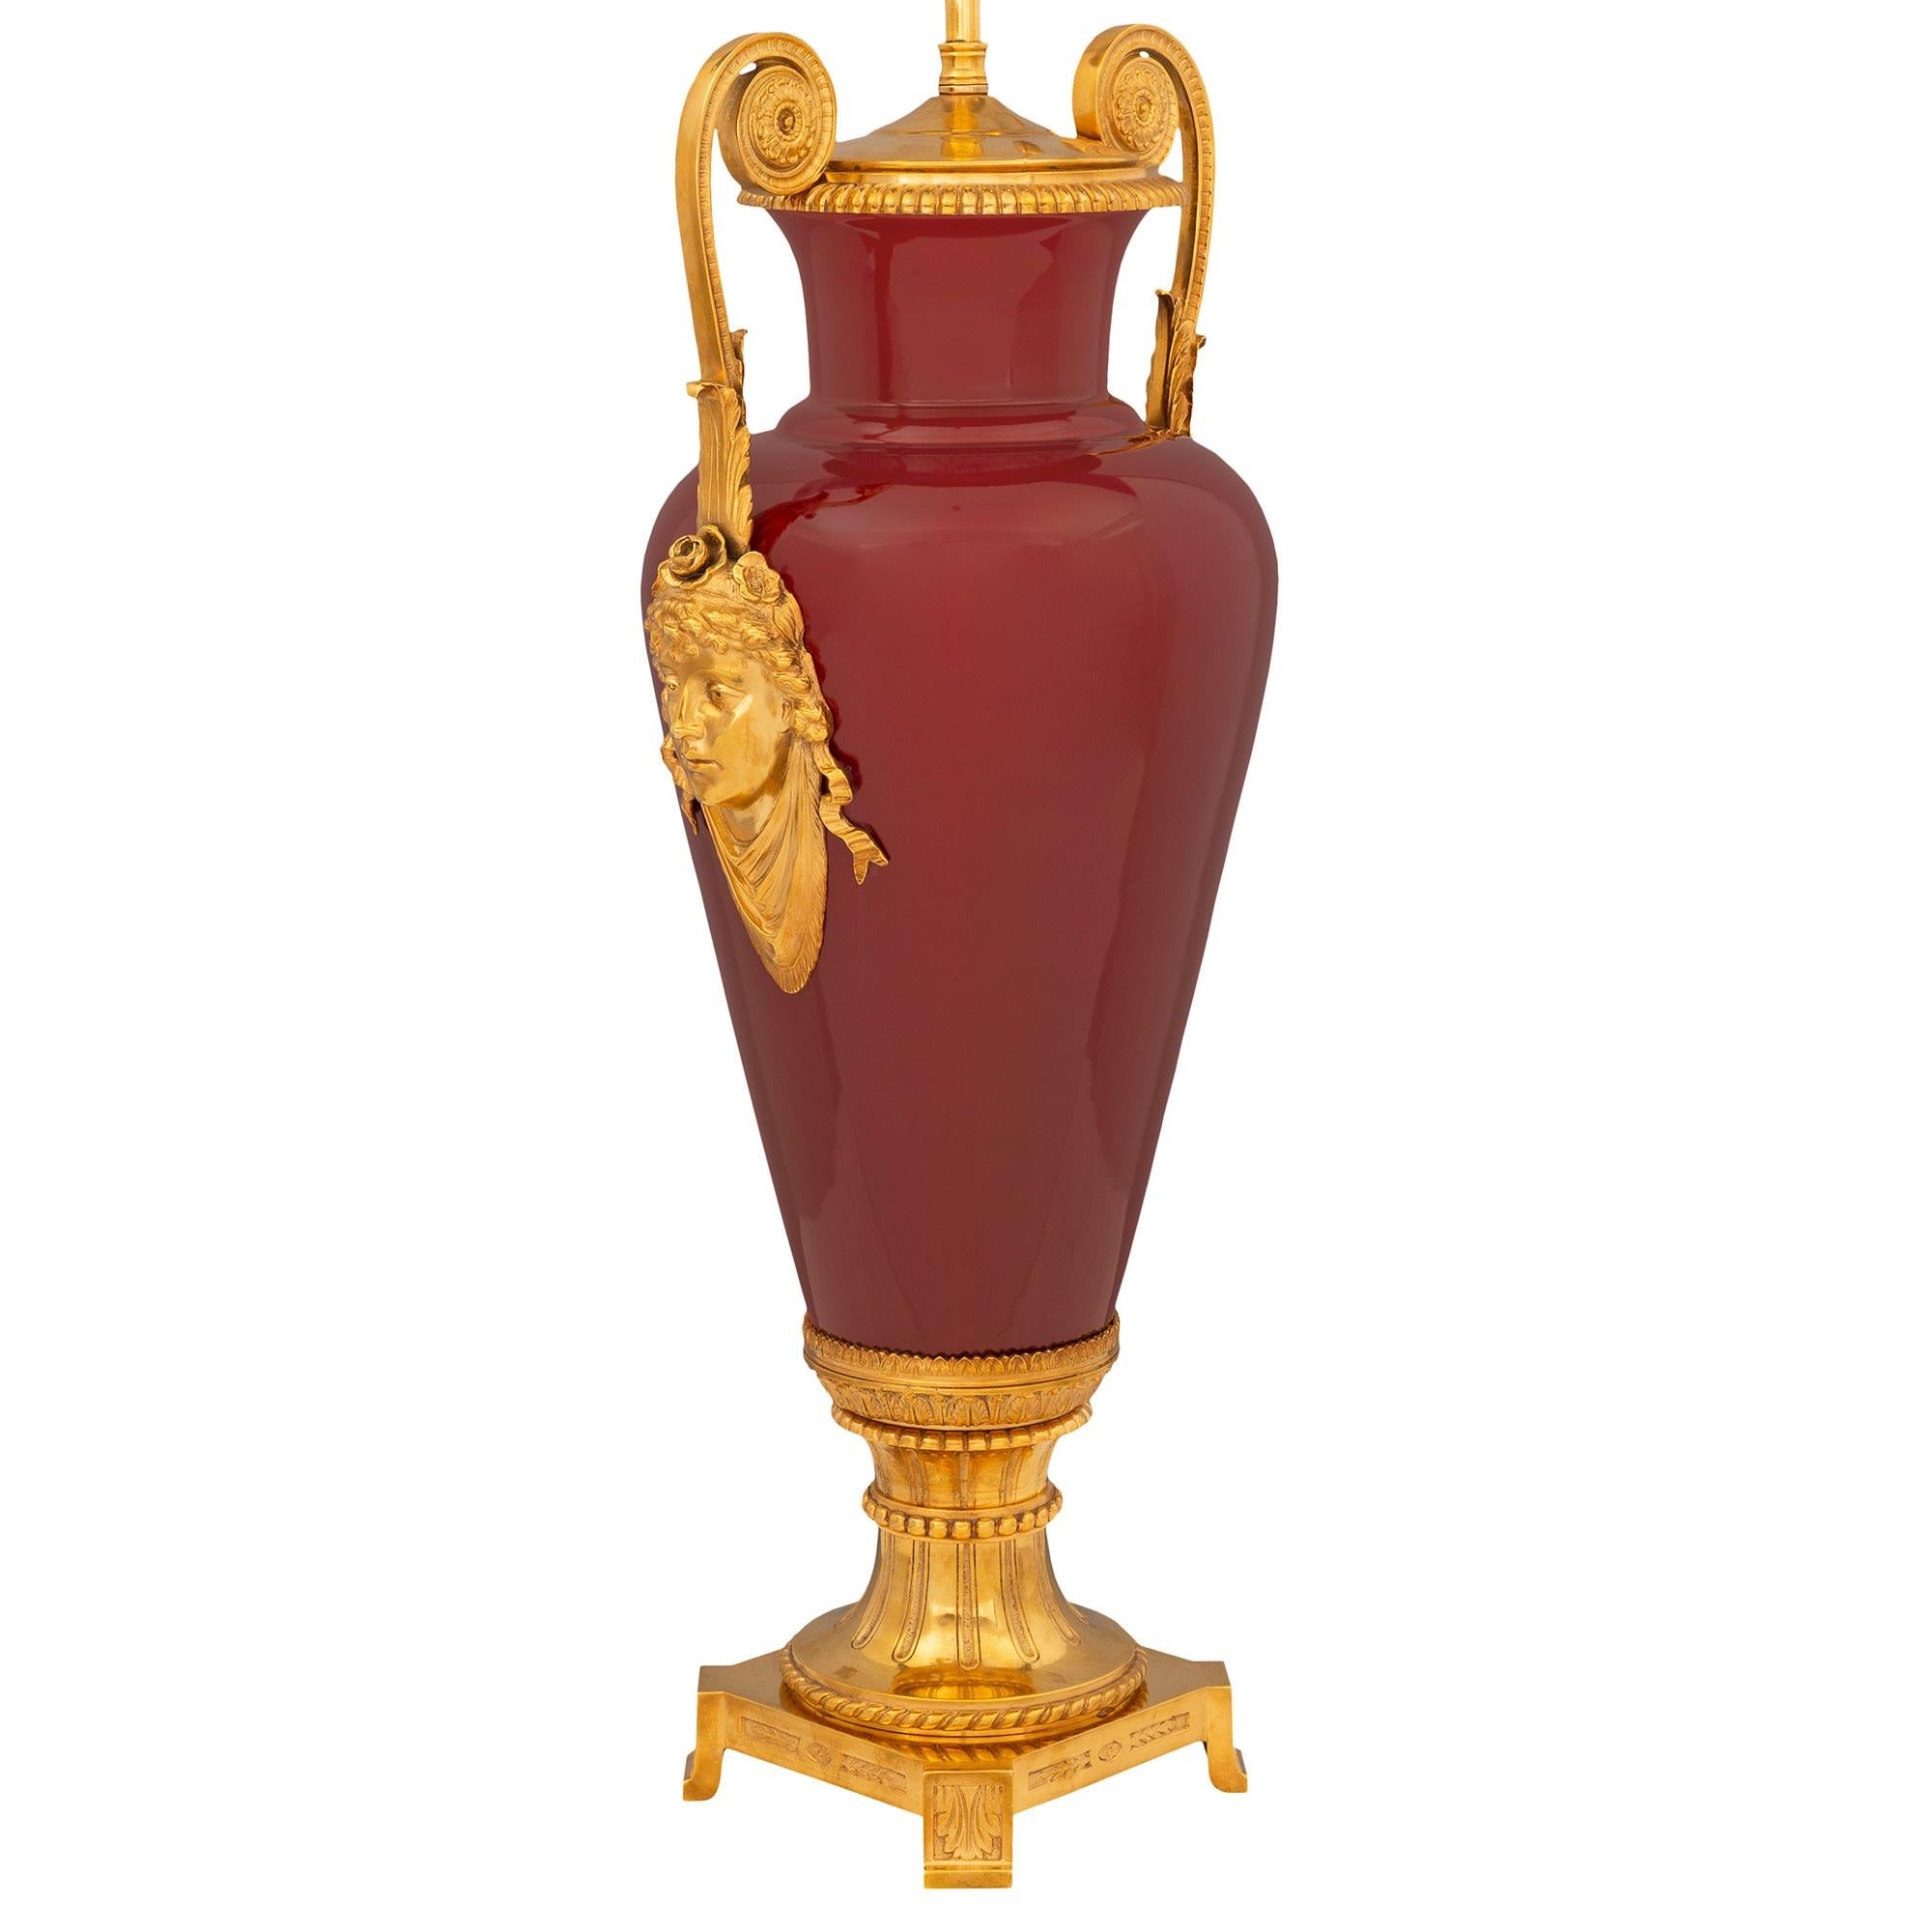 French 19th Century Louis XVI St. Oxblood Red Porcelain and Ormolu Lamp In Good Condition For Sale In West Palm Beach, FL